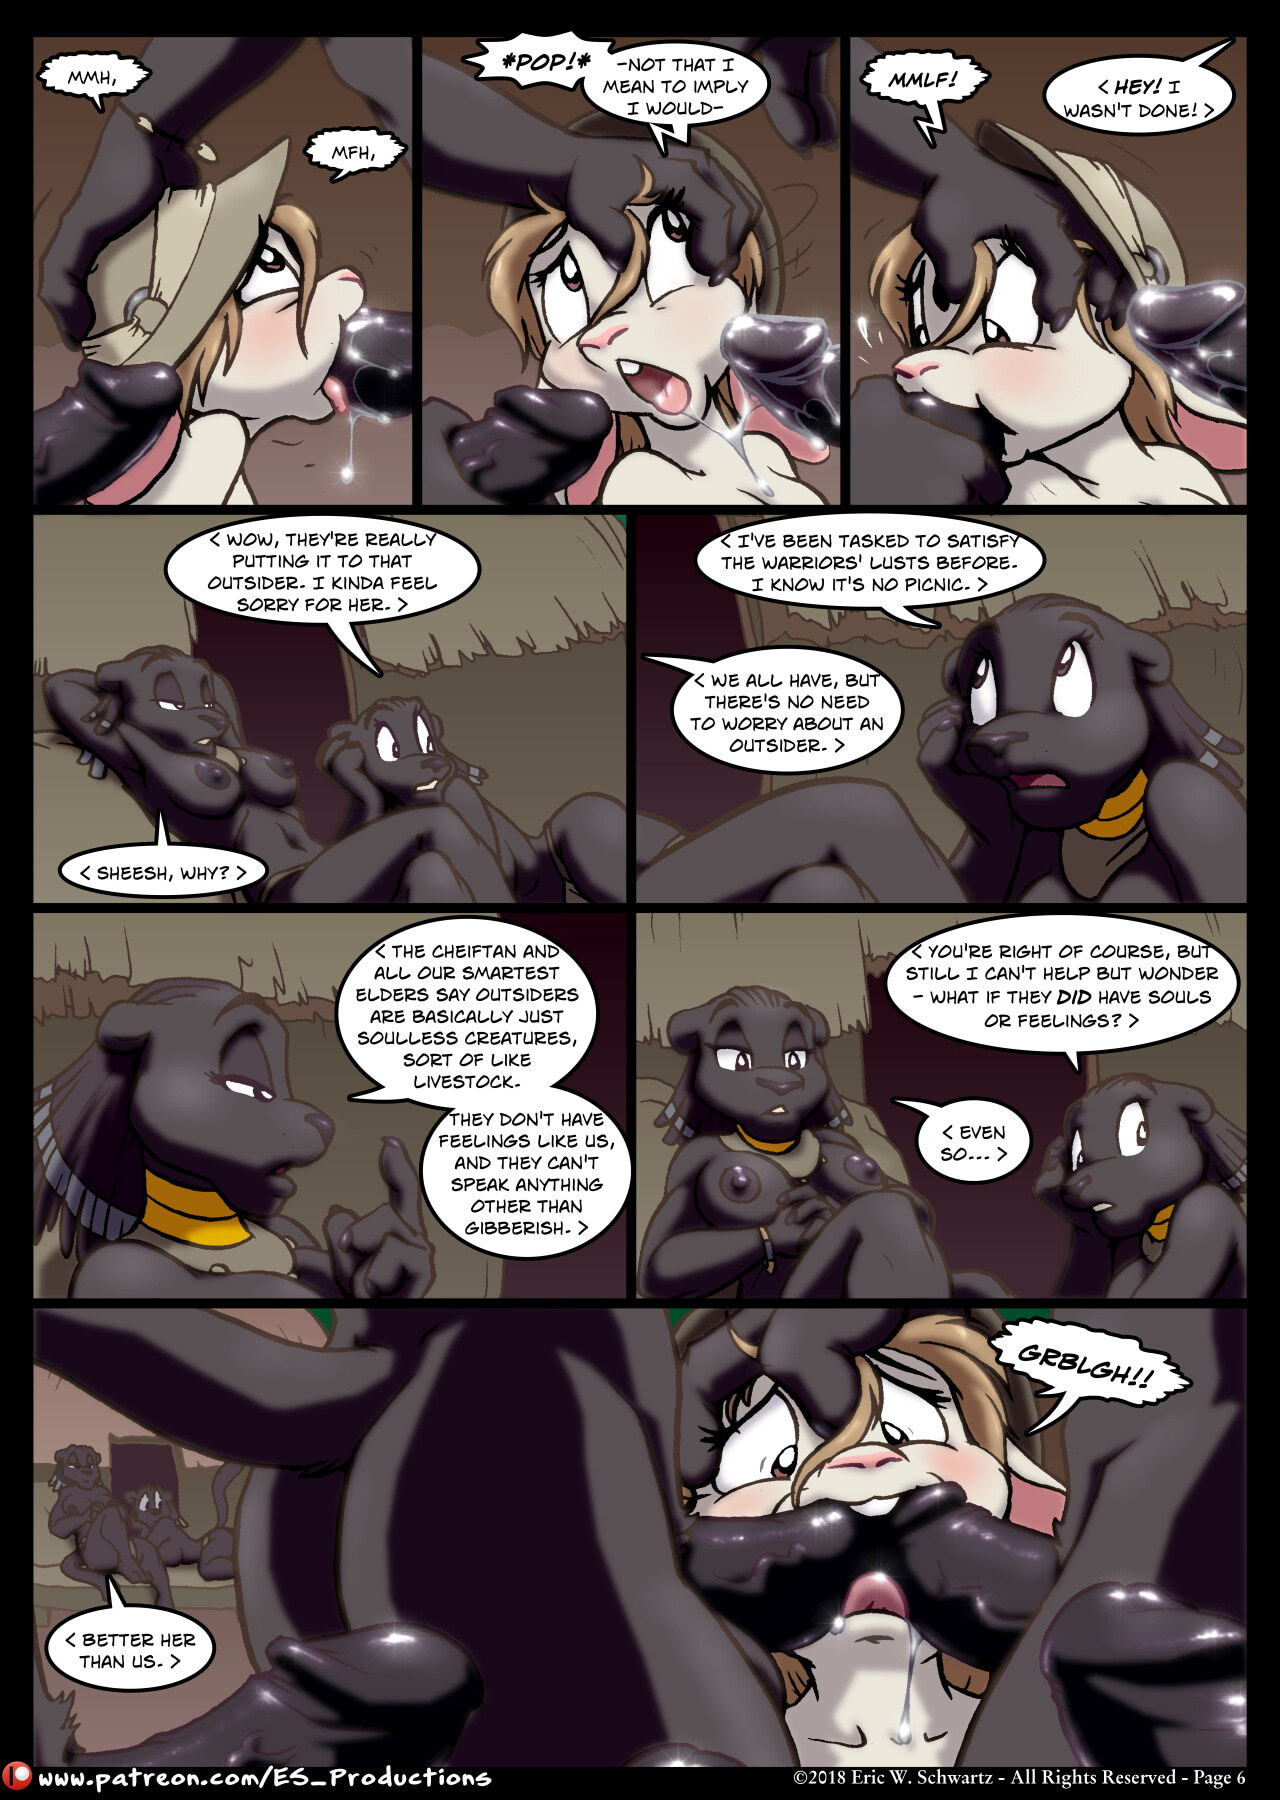 The Misadventures of Jane Cottontail - Page 7